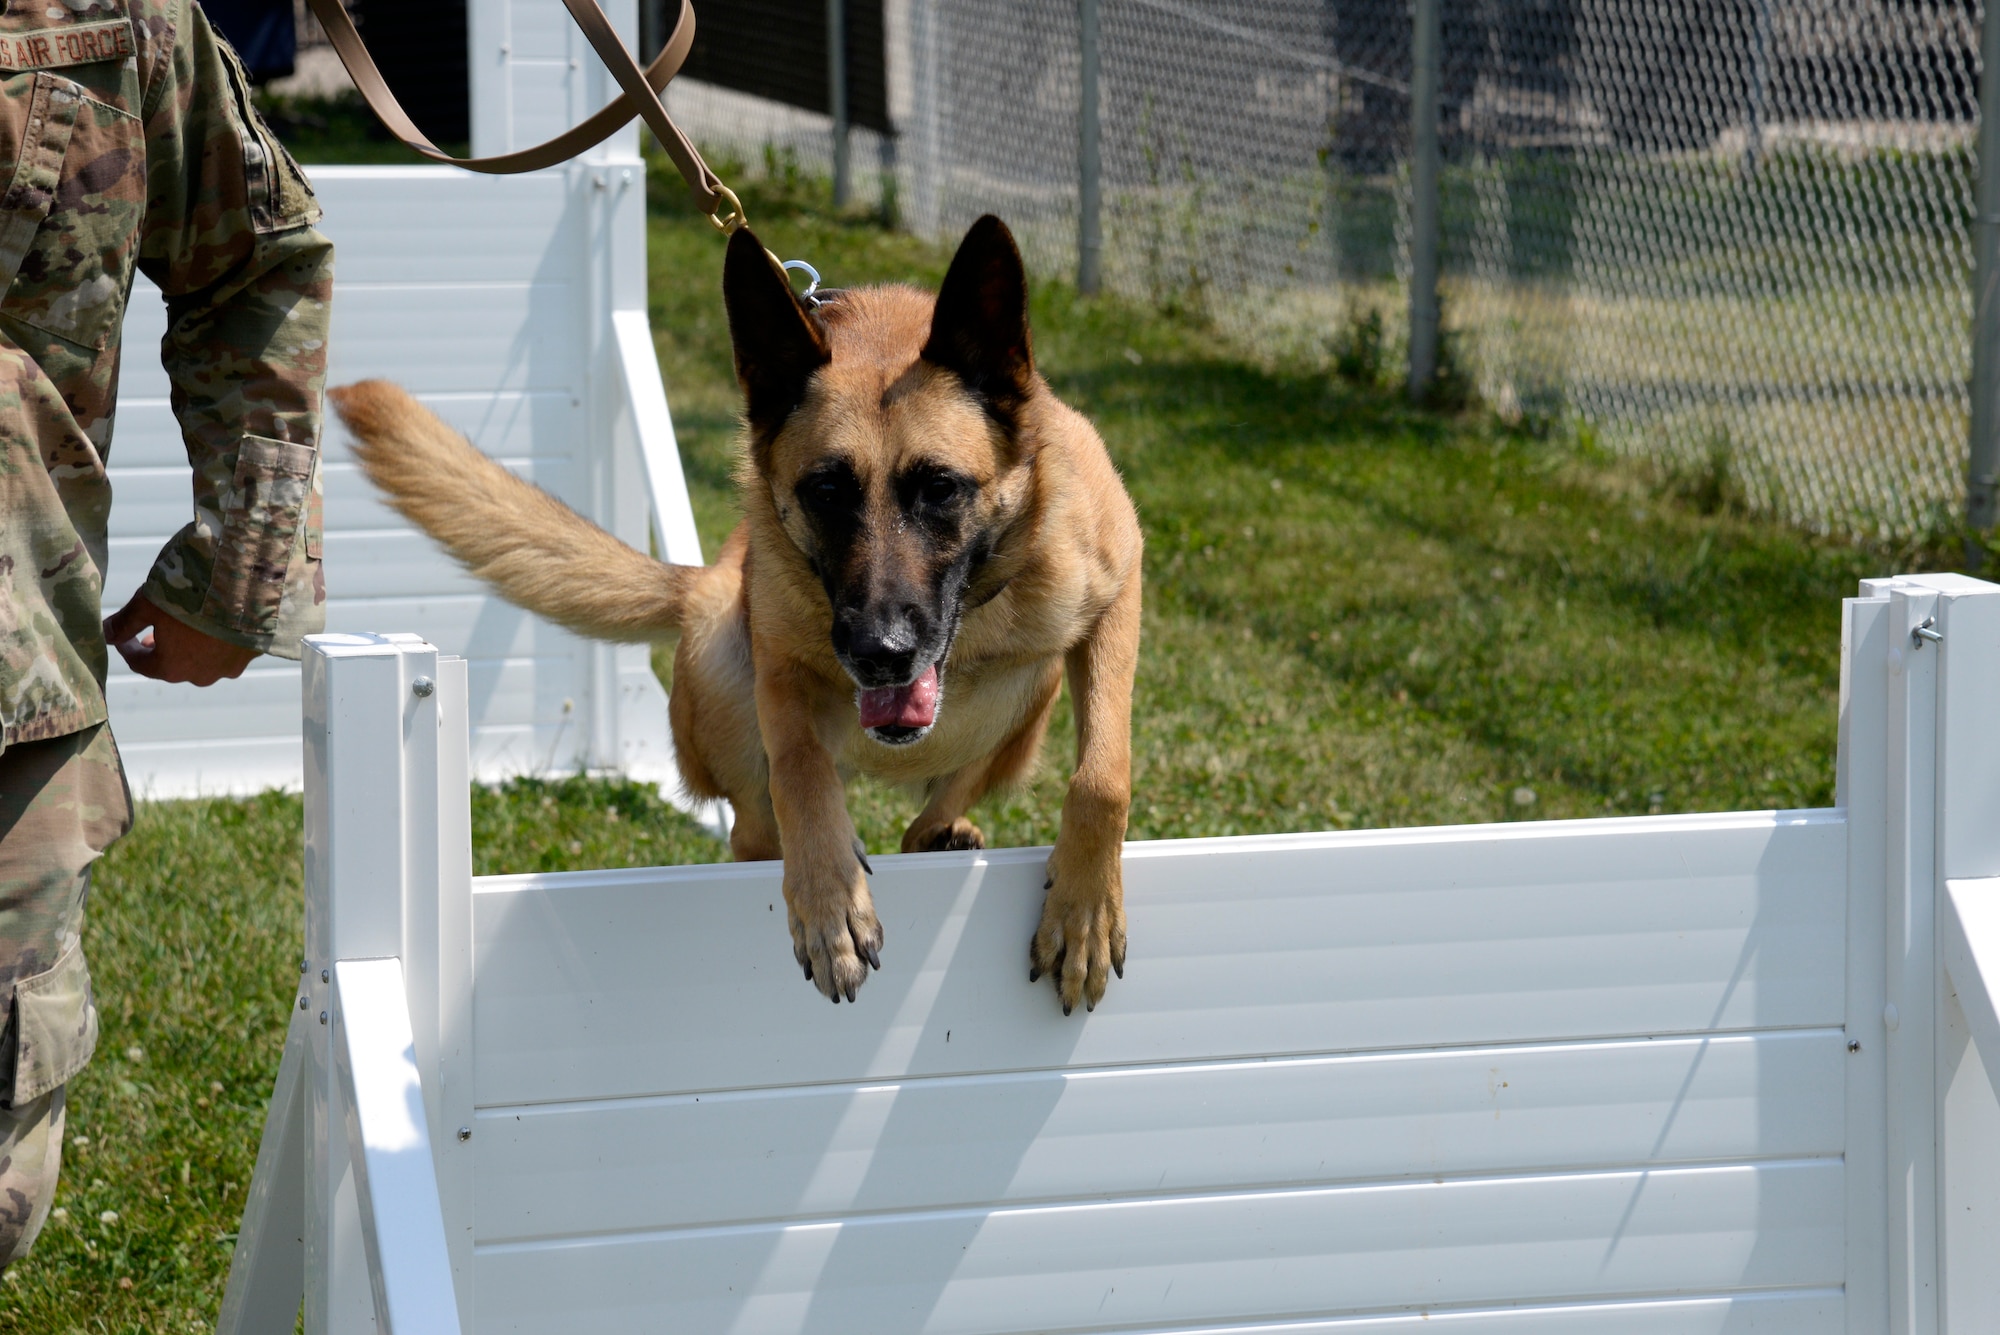 Mesha, an 88th Security Forces Squadron military working dog, and her handler, Staff Sgt. Matthew Watkins, run through hurdles Aug. 18 on the new MWD obstacle course at Wright-Patterson Air Force Base. (U.S. Air Force photo by Airman 1st Class Jack Gardner)